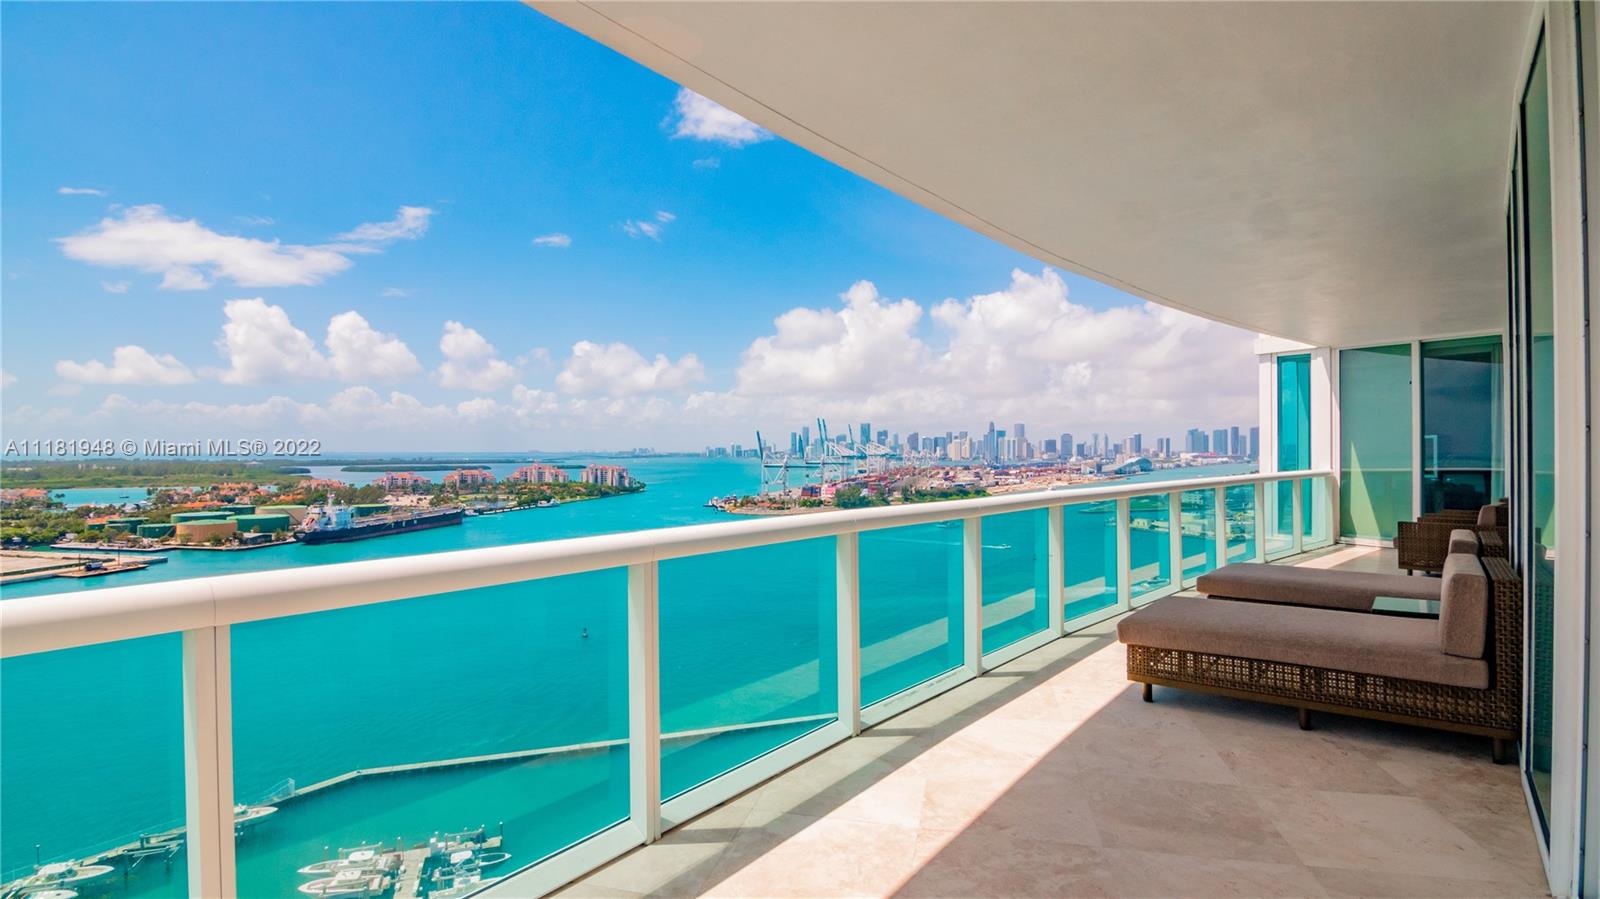 JUST REDUCED !! Introducing Murano at Portofino 2202: Showcasing panoramic views of the Bay, downtown skyline, and breathtaking ocean views. Enter your private foyer leading to a split layout. This pristinely renovated residence is one of the largest 3BR floor plans in Sofi 2,618 SF featuring a wide-open layout and sunrise & sunset terraces. Custom Italian doors, all entryways open to 36". Three spacious bedrooms w/ en-suite bathrooms, large master, formal dining, custom built-ins, electric shades, remodeled bathrooms & custom kitchen designed by Snaidero including, Miele appliances, quartz countertops, and recessed lighting. Over 600k in upgrades! 5-star amenities including Murano’s private beach club and restaurant, impressive two-story gym, tennis courts and 24-hr valet.